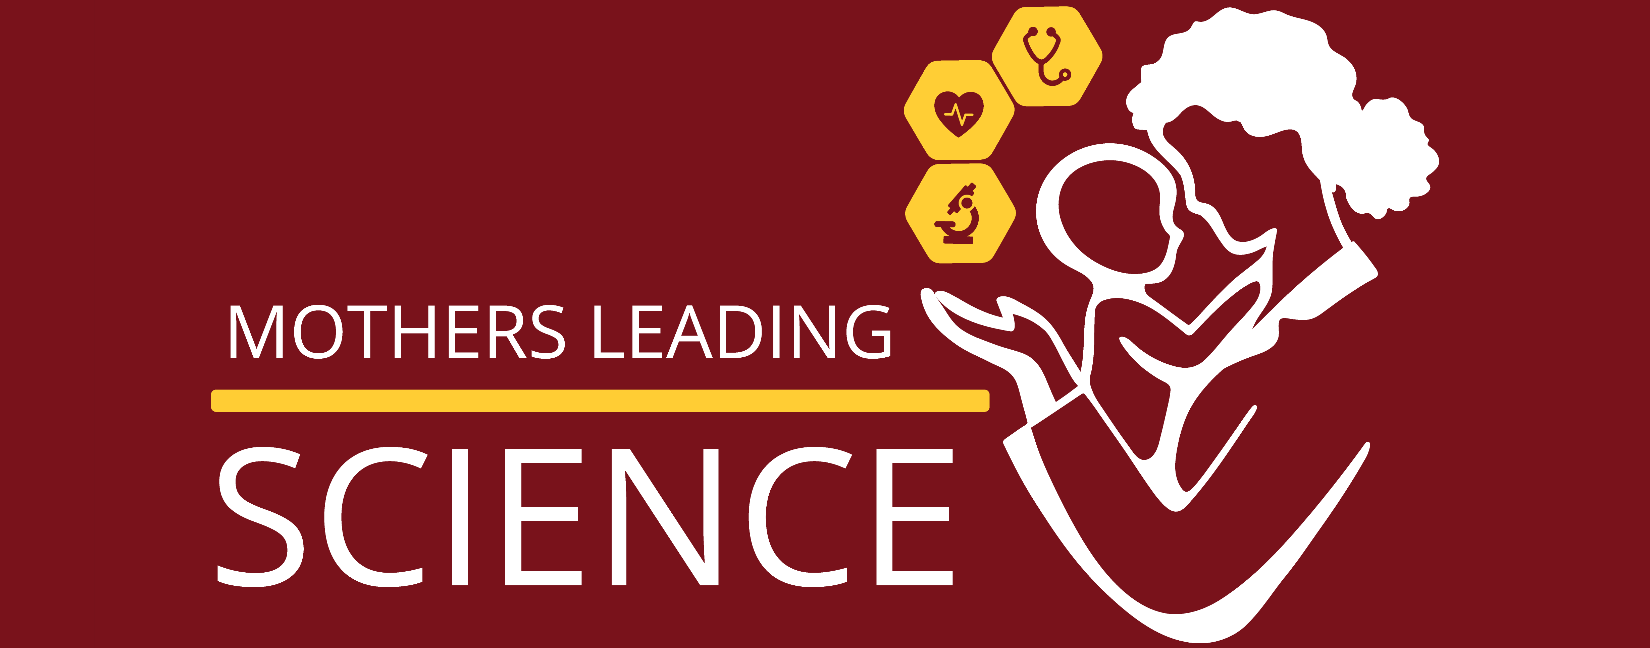 Mothers Leading Science Banner